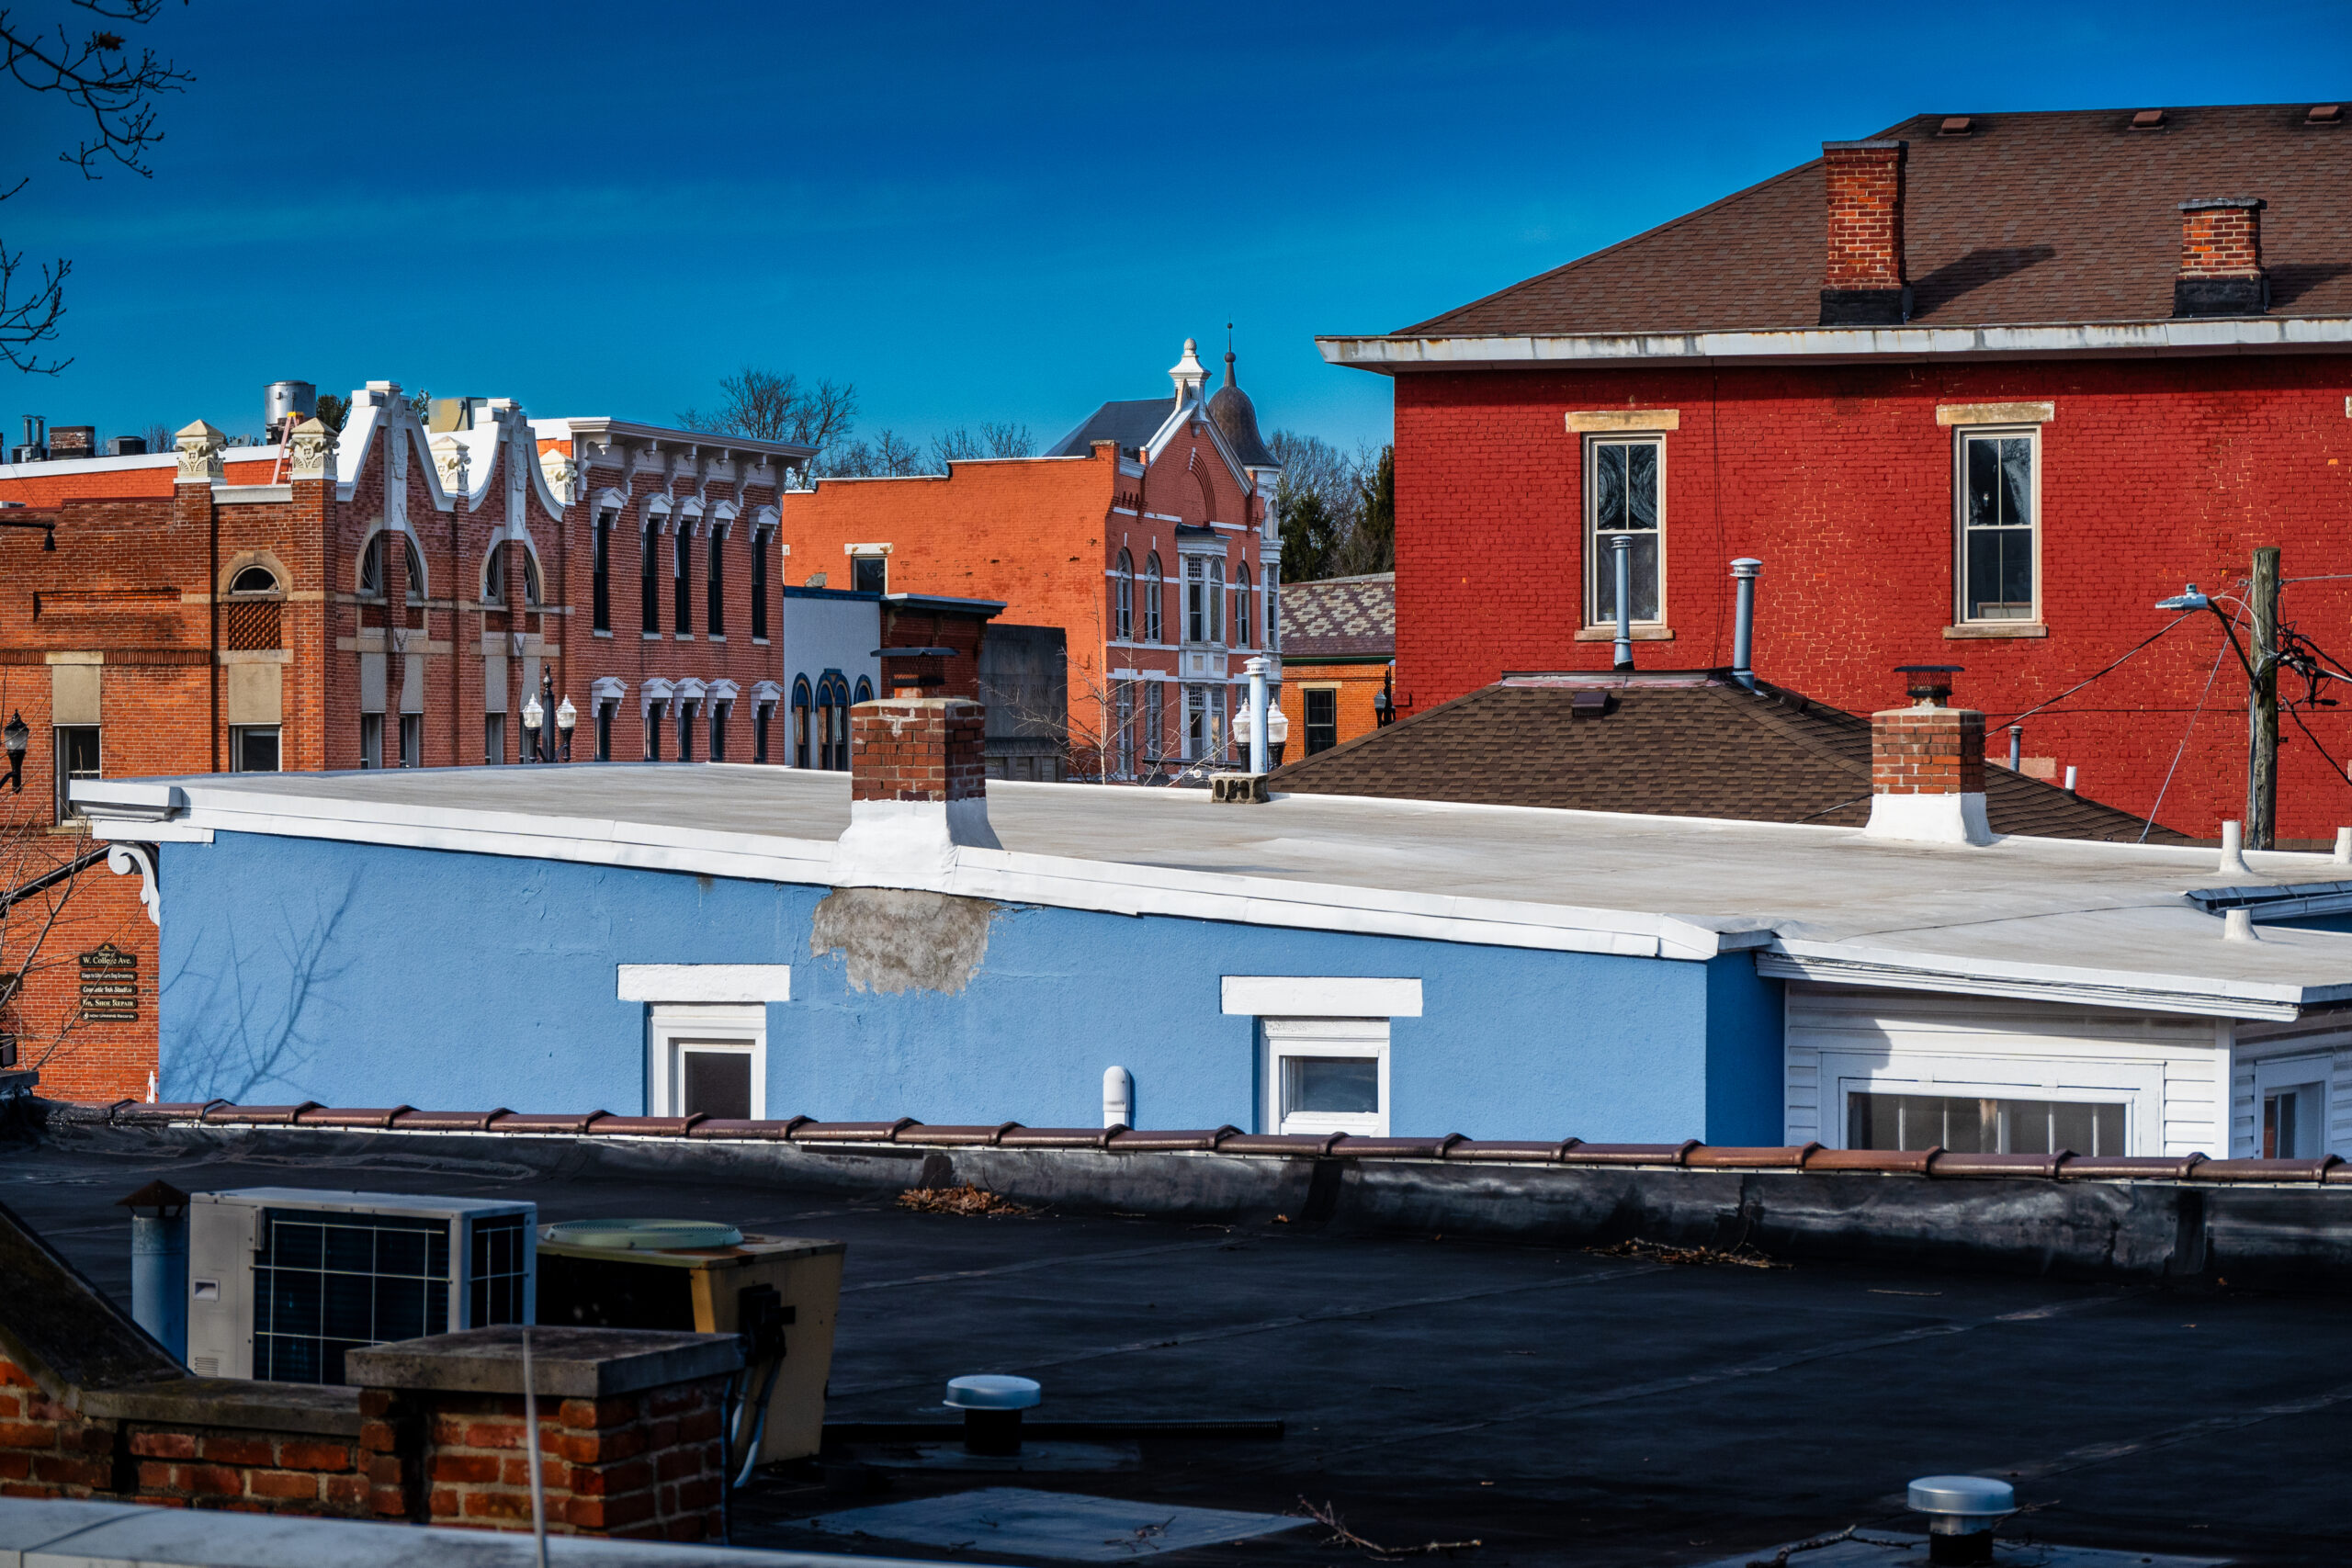 Rooftops and buildings in Uptown Westerville feel the warmth of the sun after several weeks of cold and wet weather. My Final Photo for February 1, 2024.